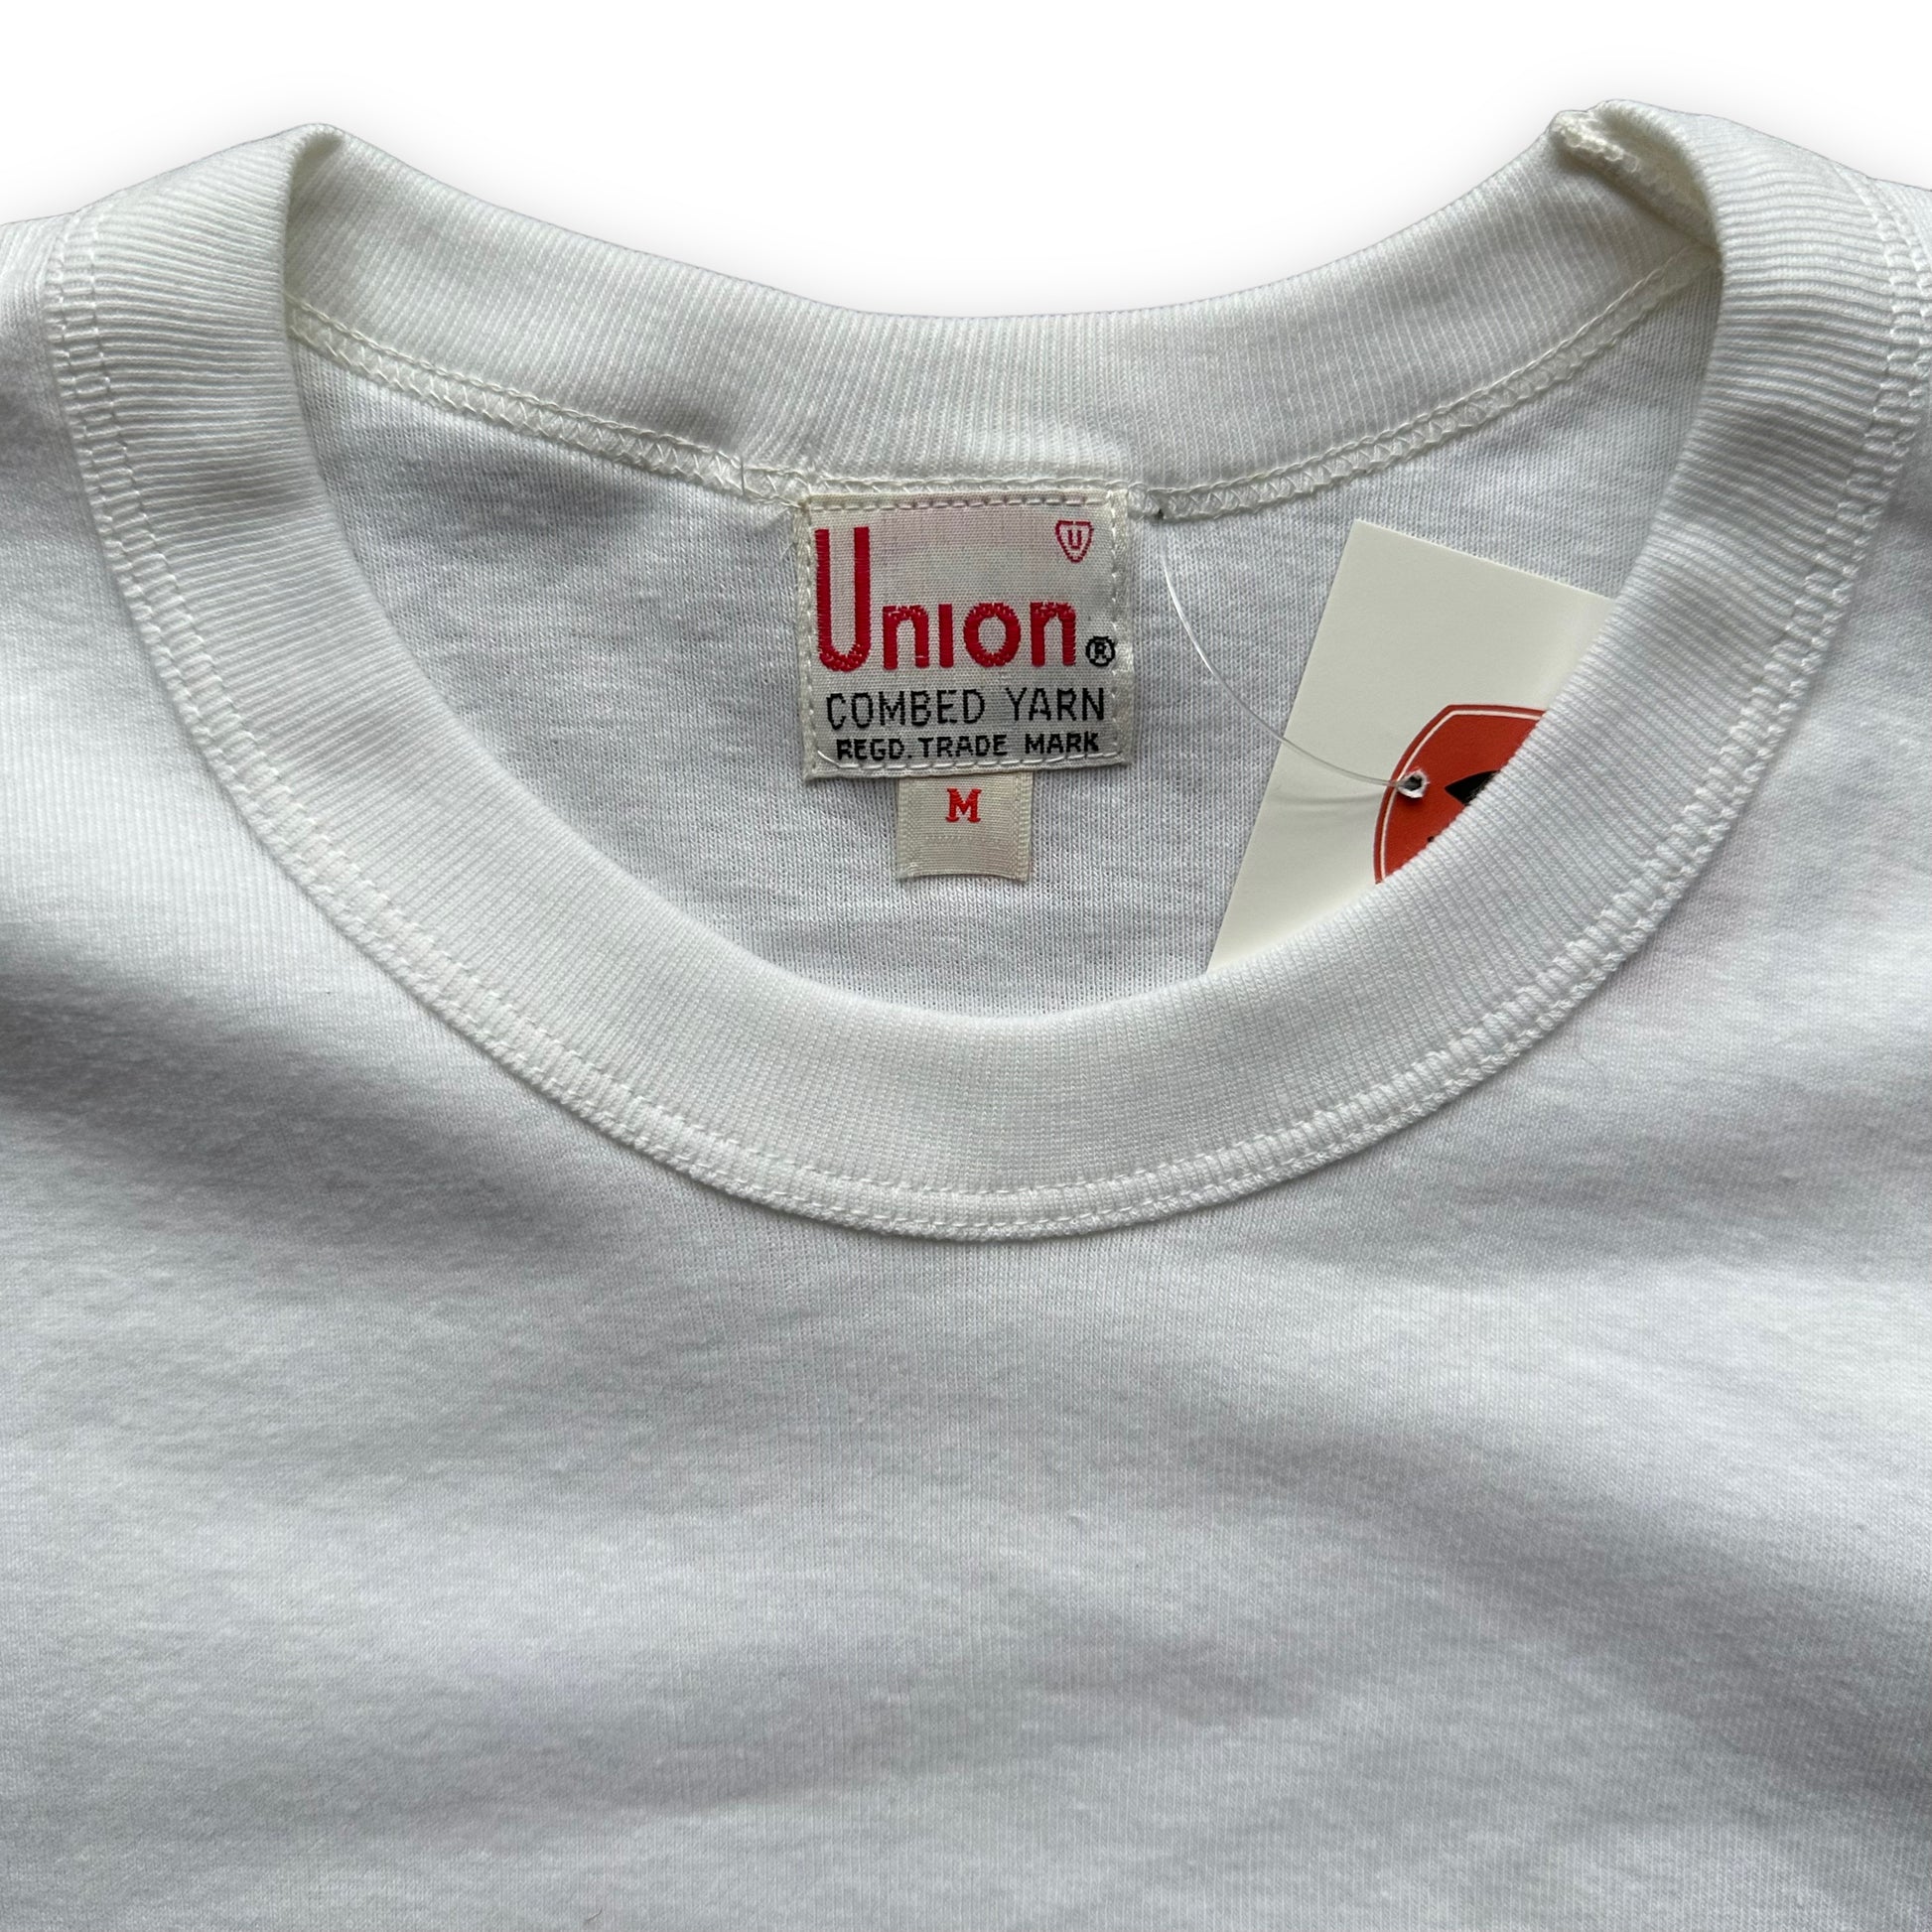 Tag View of Vintage Union Combed Yarn Blank Tee Shirt SZ M | Vintage Blank Tees Seattle | Vintage T-Shirts Seattle